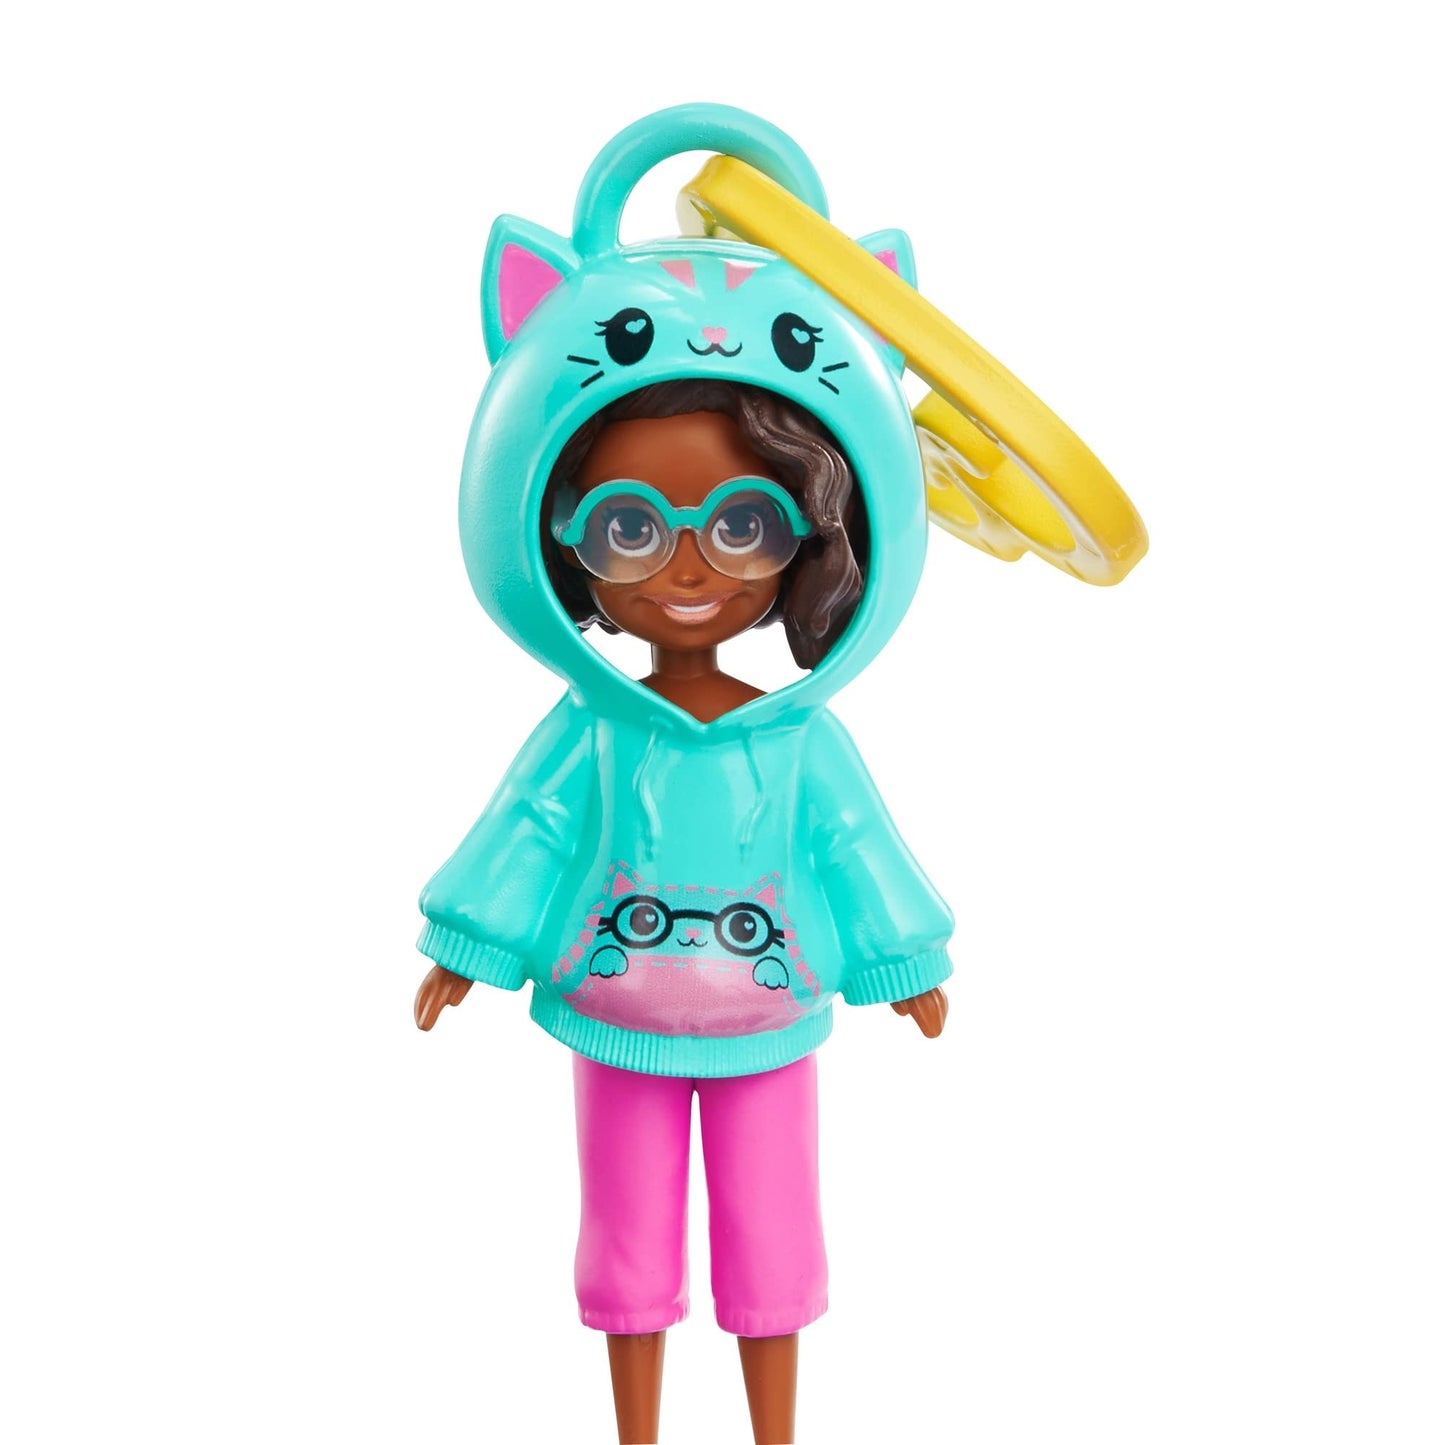 Polly Pocket Friend Clips Shani Doll with Cat Hoodie and Heart-Shaped Clip